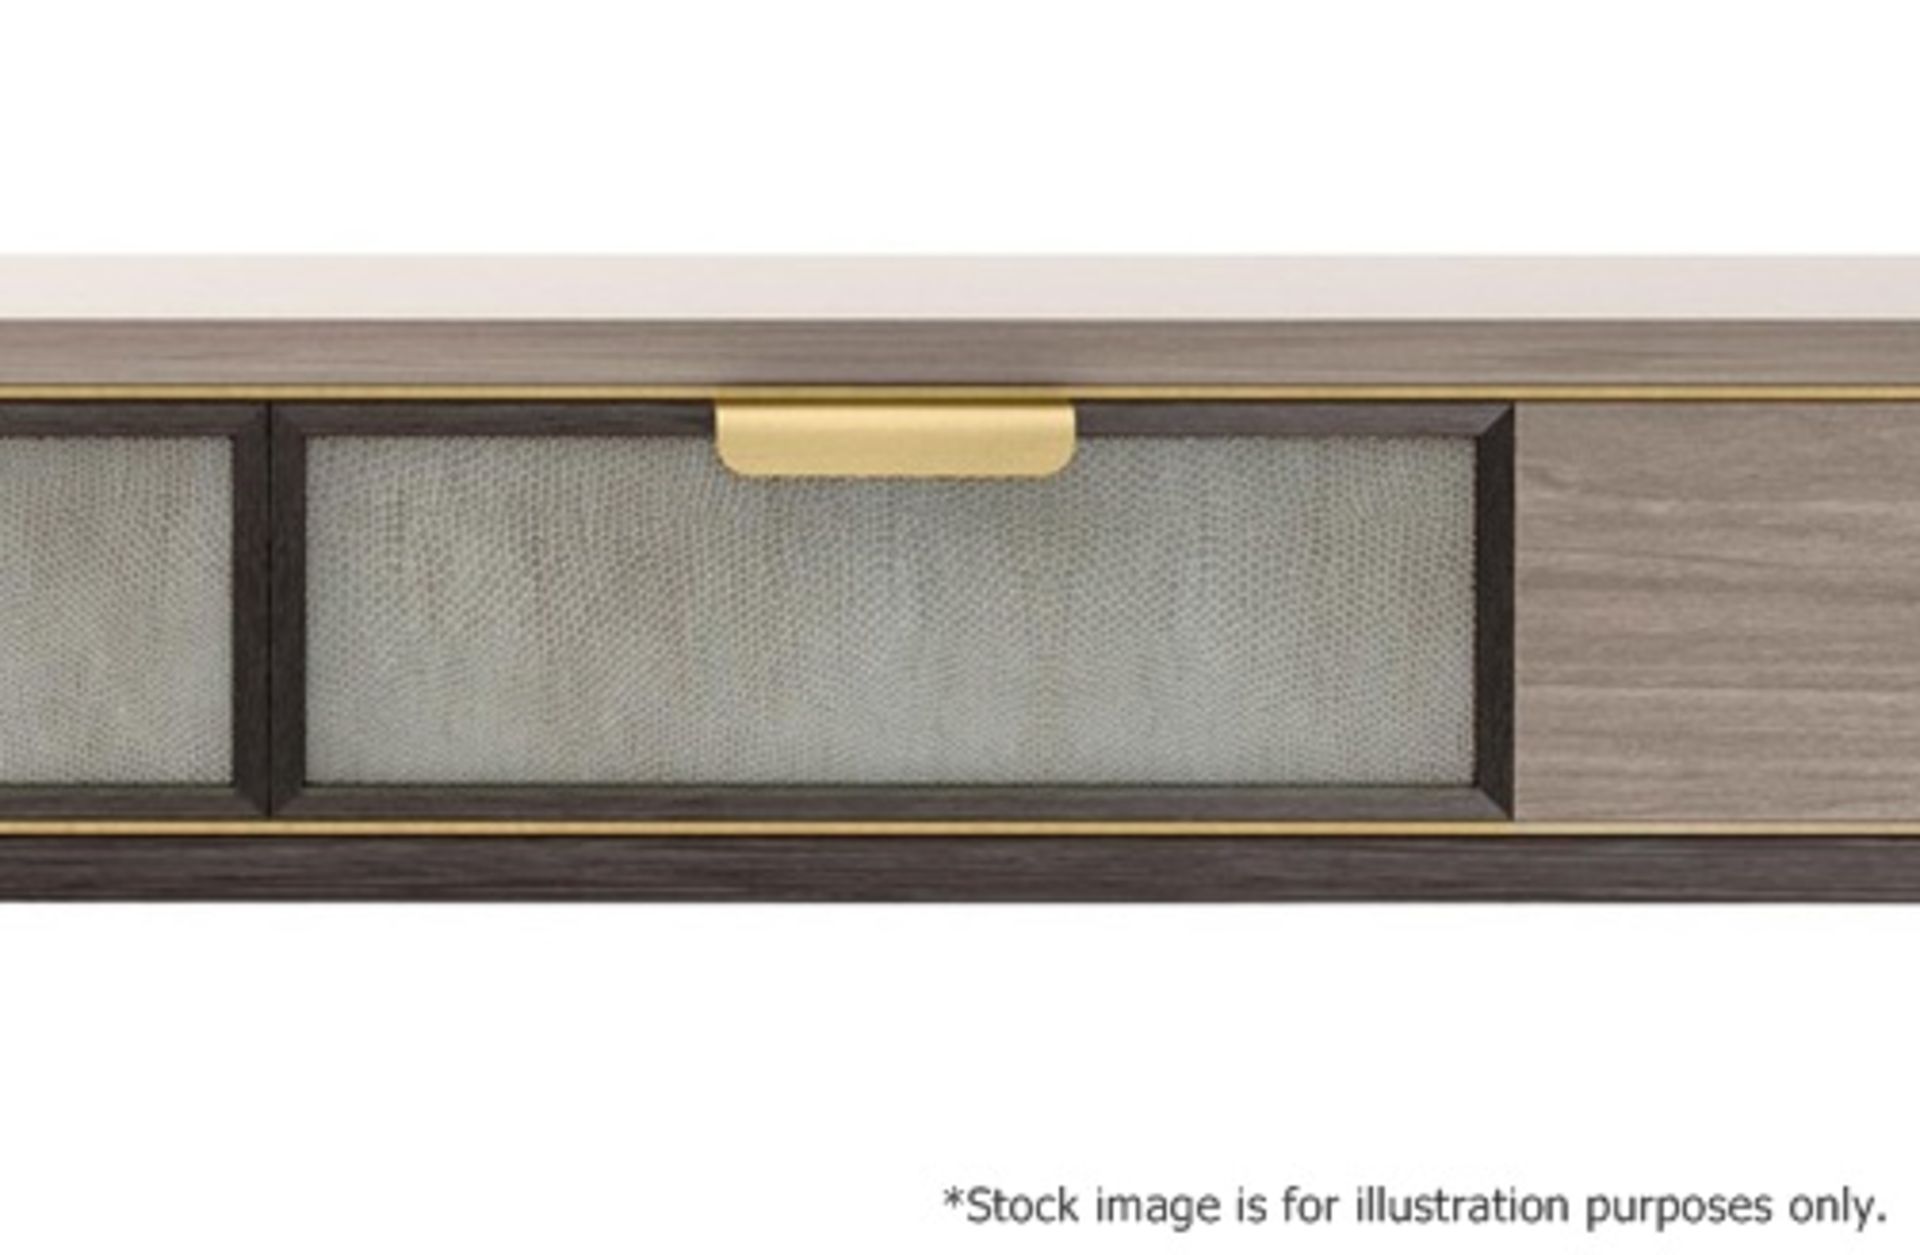 1 x FRATO 'Mandalay' Luxury Designer 2-Drawer Dresser Dressing Table In A Gloss Finish - RRP £4,300 - Image 2 of 17